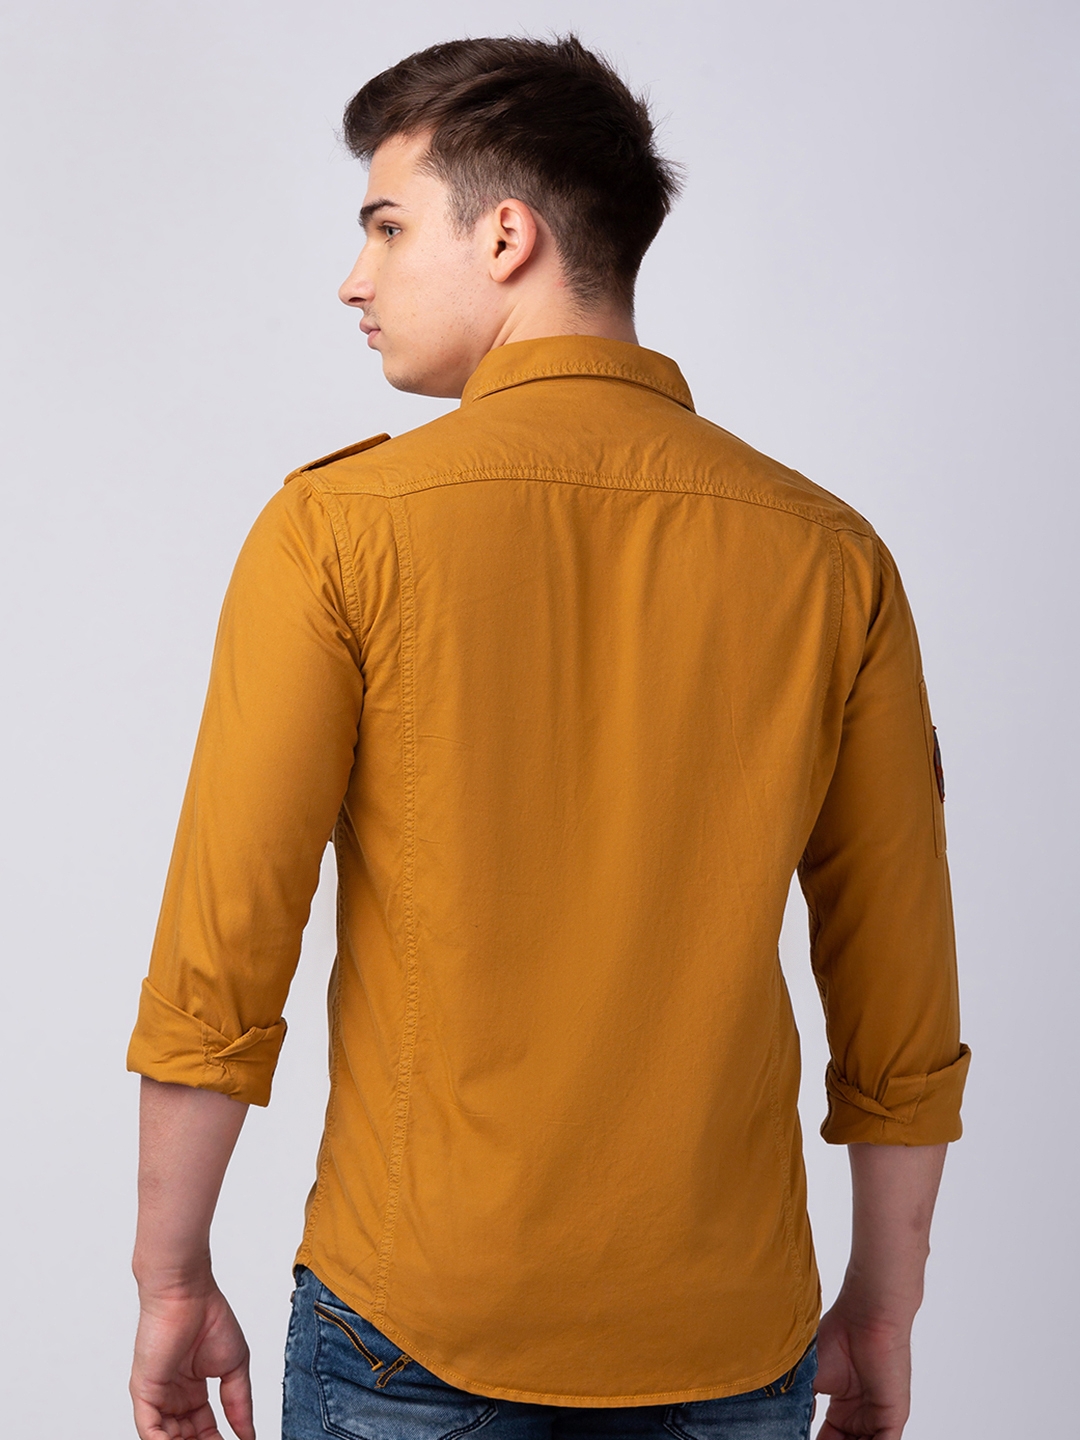 Spykar | Men's Brown Cotton Solid Casual Shirts 2